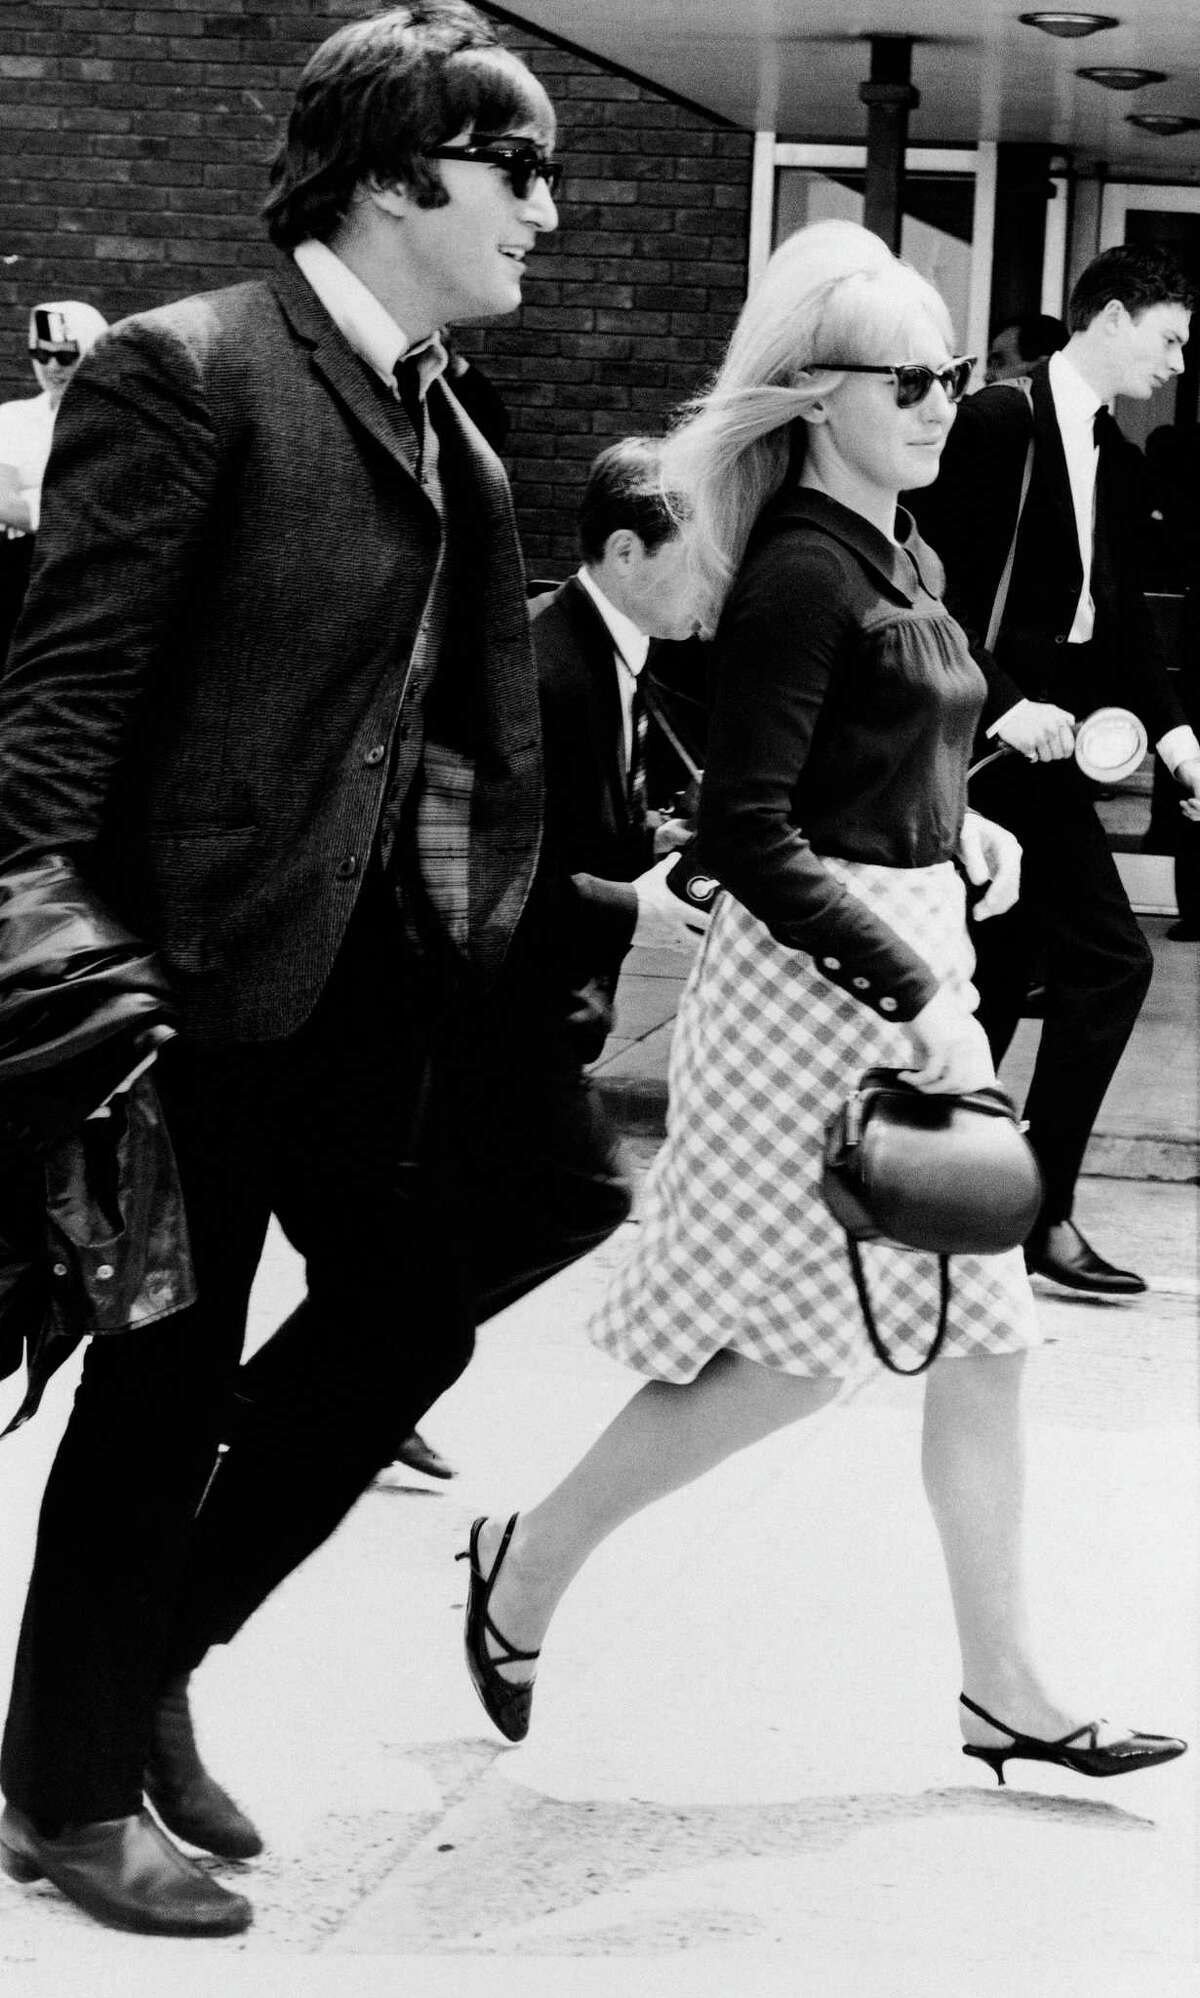 File- In this July 2,1964 file photo, singer John Lennon and his then wife, Cynthia, at Luton airport after 'The Beatles' arrived home from their three-week tour of Australia and New Zealand. Cynthia Lennon passed away on Thursday, April 1, 2015, aged 75, at her home in Mallorca, Spain, following a short but brave battle with cancer. (AP Photo/Victor Boynton, File)